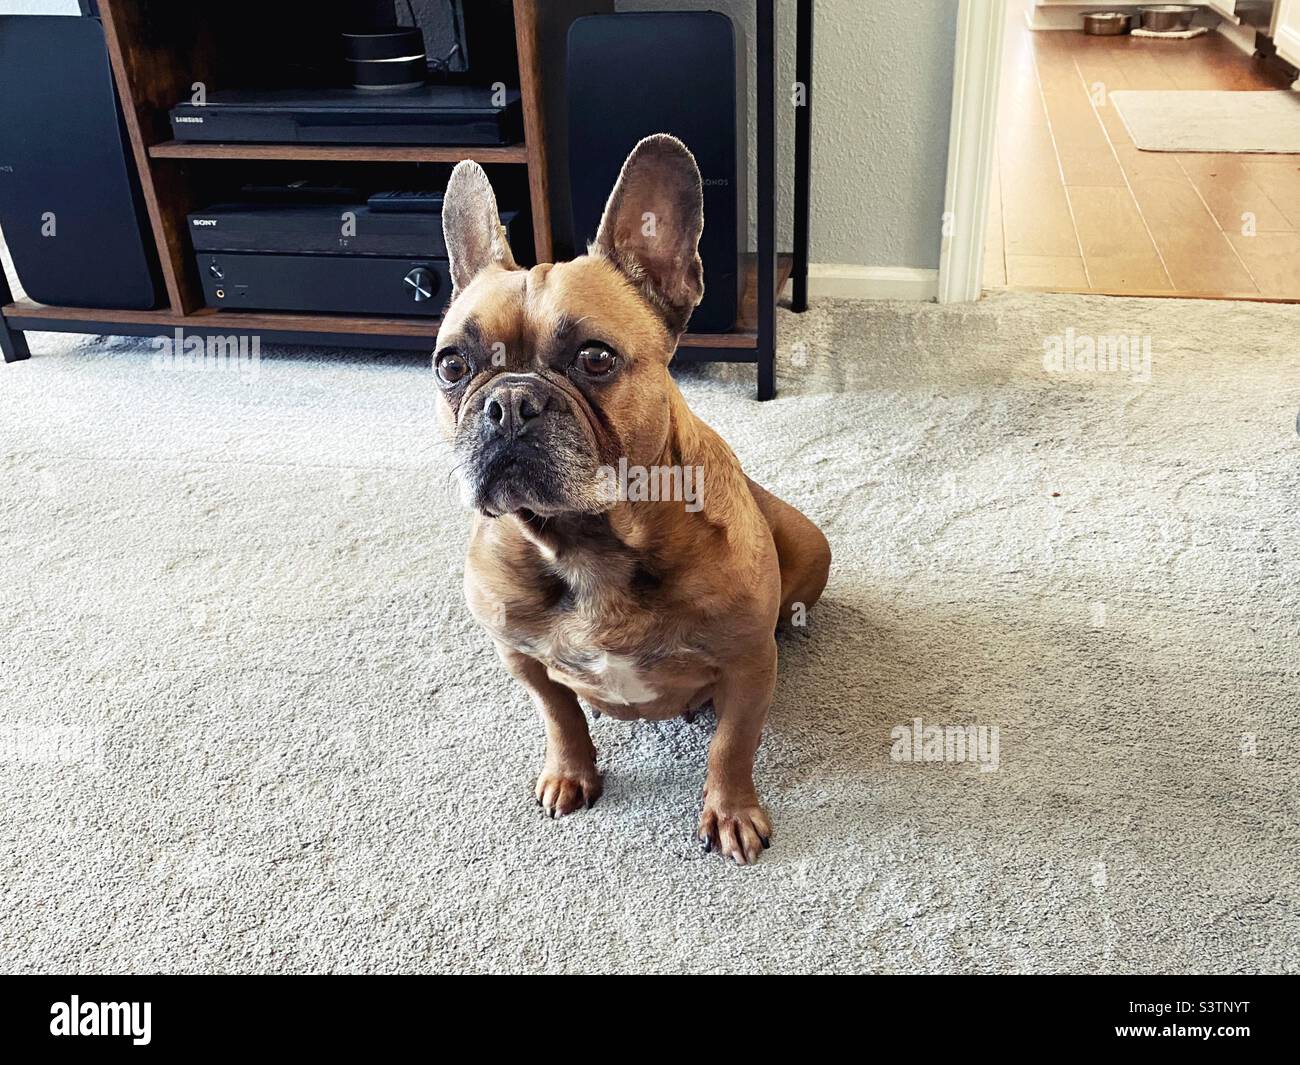 A cute French bulldog with ears up and a startled expression. Stock Photo